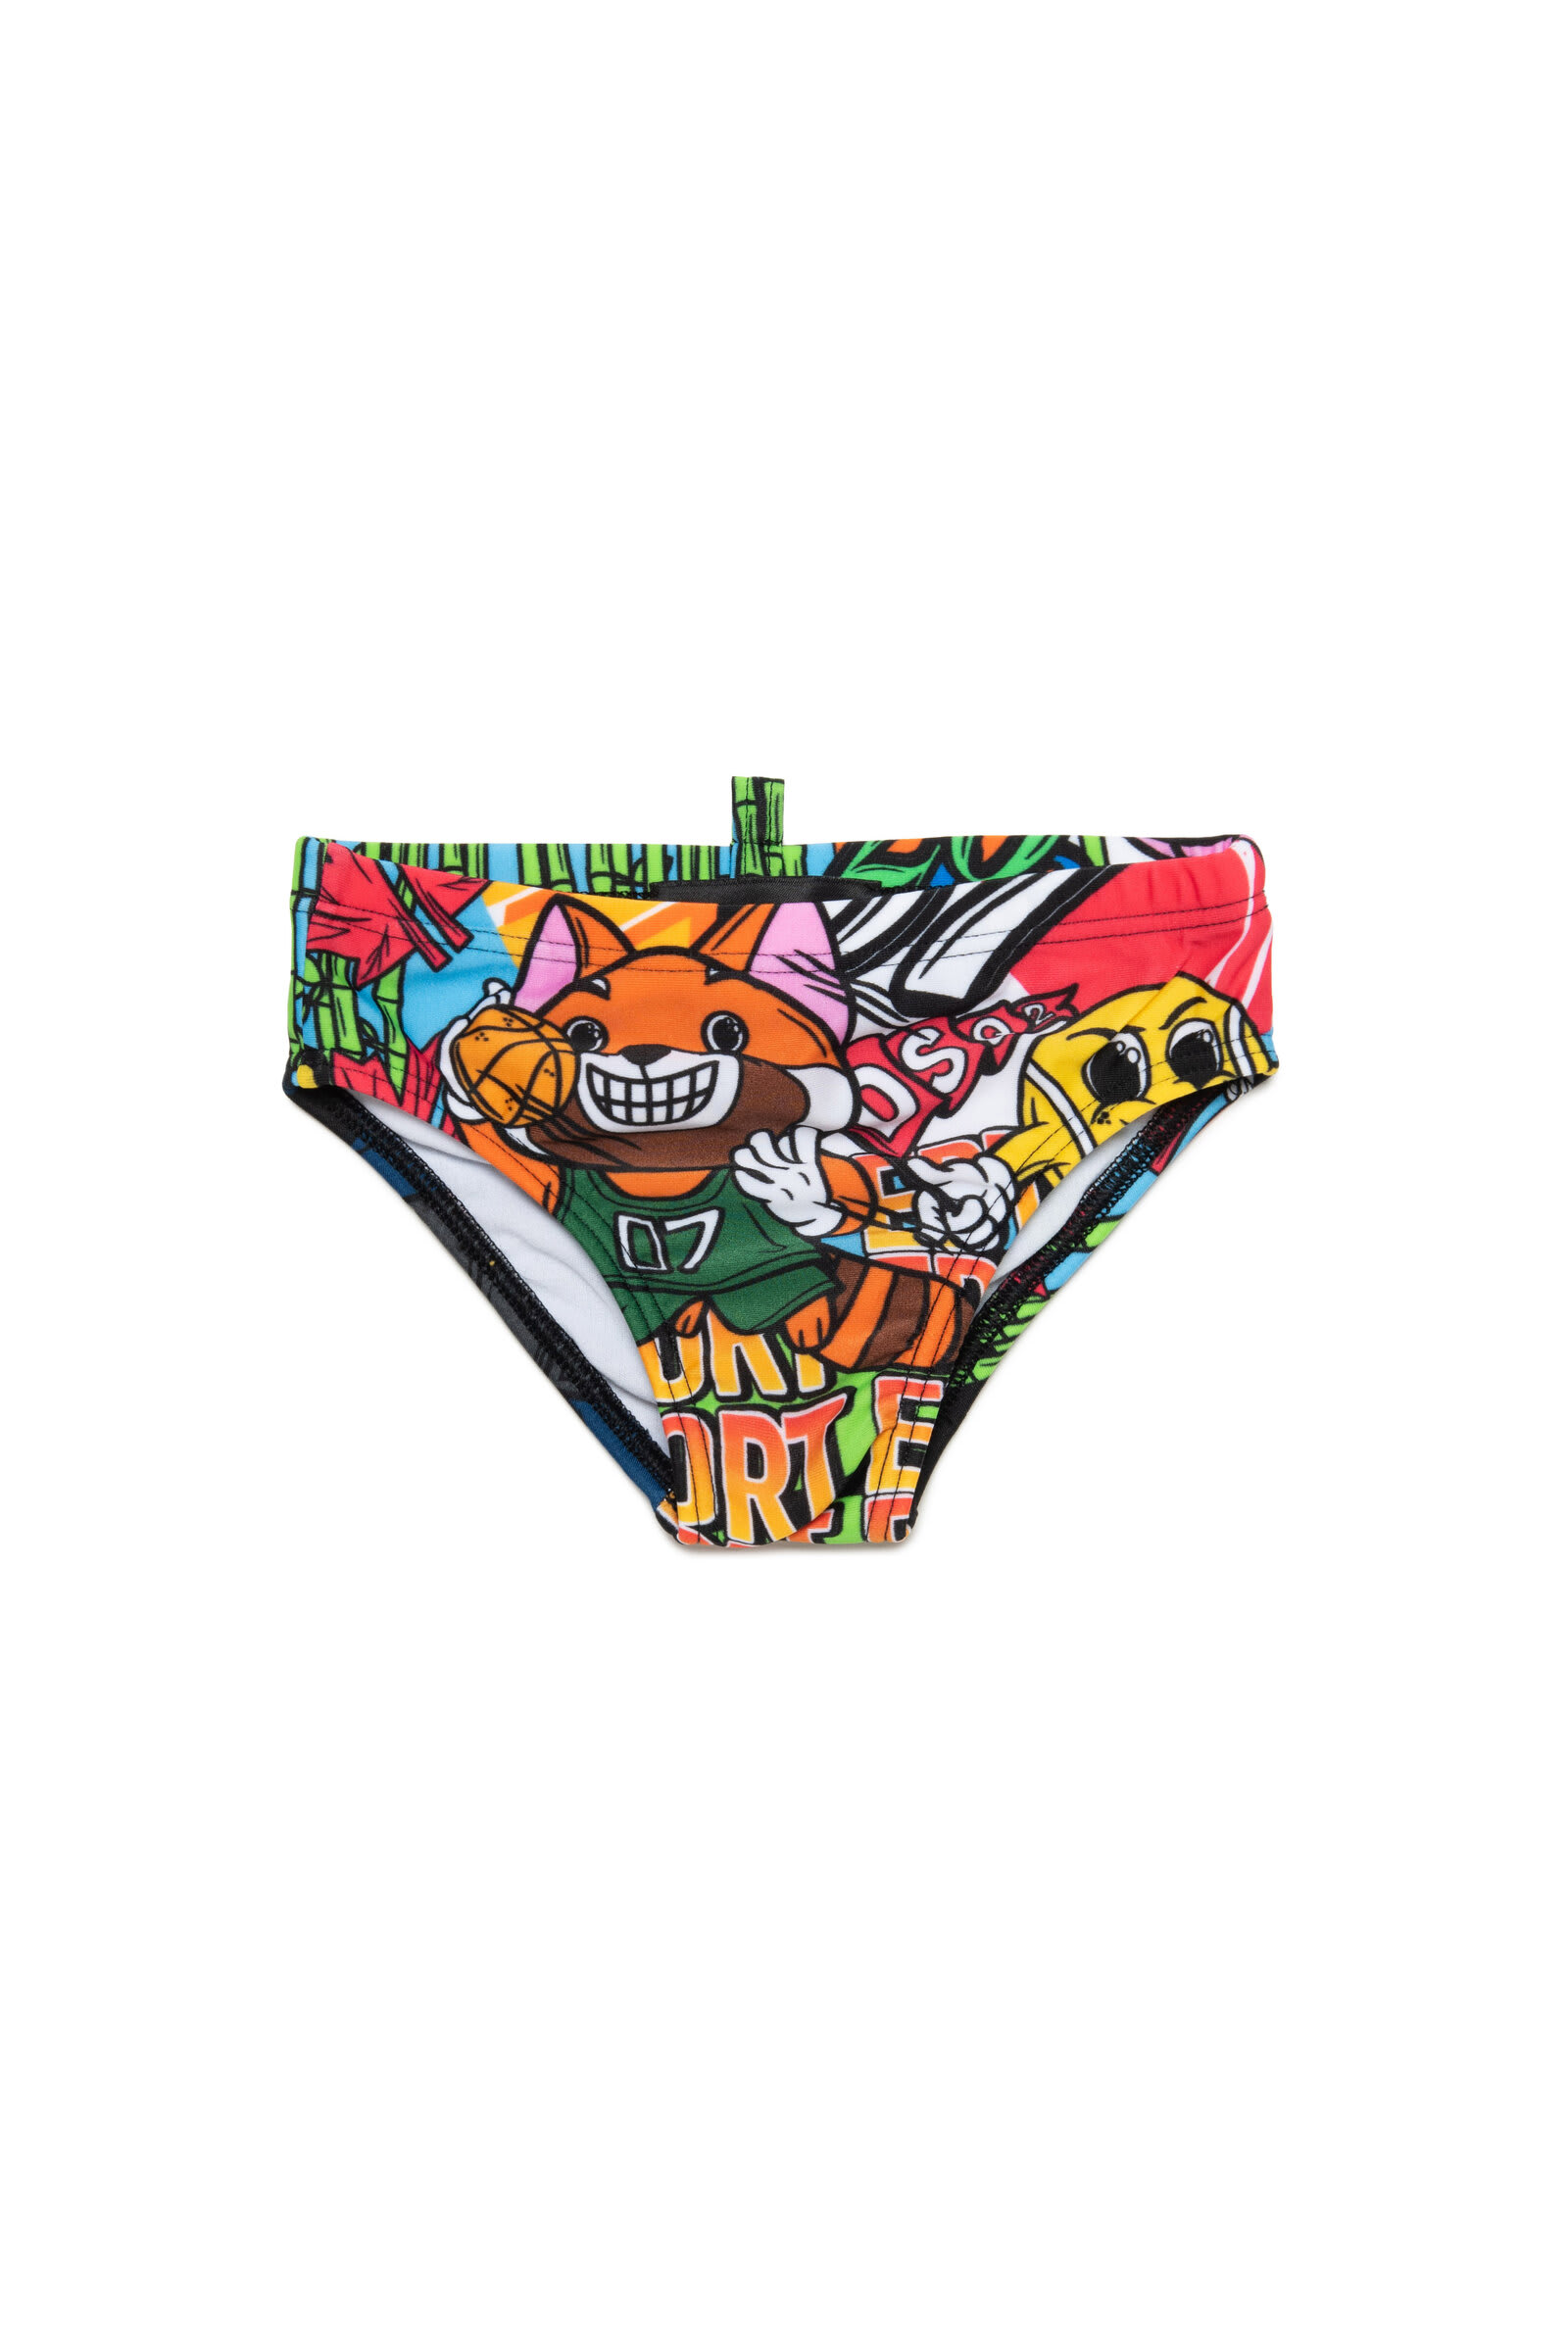 Christian Honger Matroos Dsquared2 D2m81b Sw Boxer Dsquared Brief Swimming Costume With Allover  Shibuya Print | italist, ALWAYS LIKE A SALE